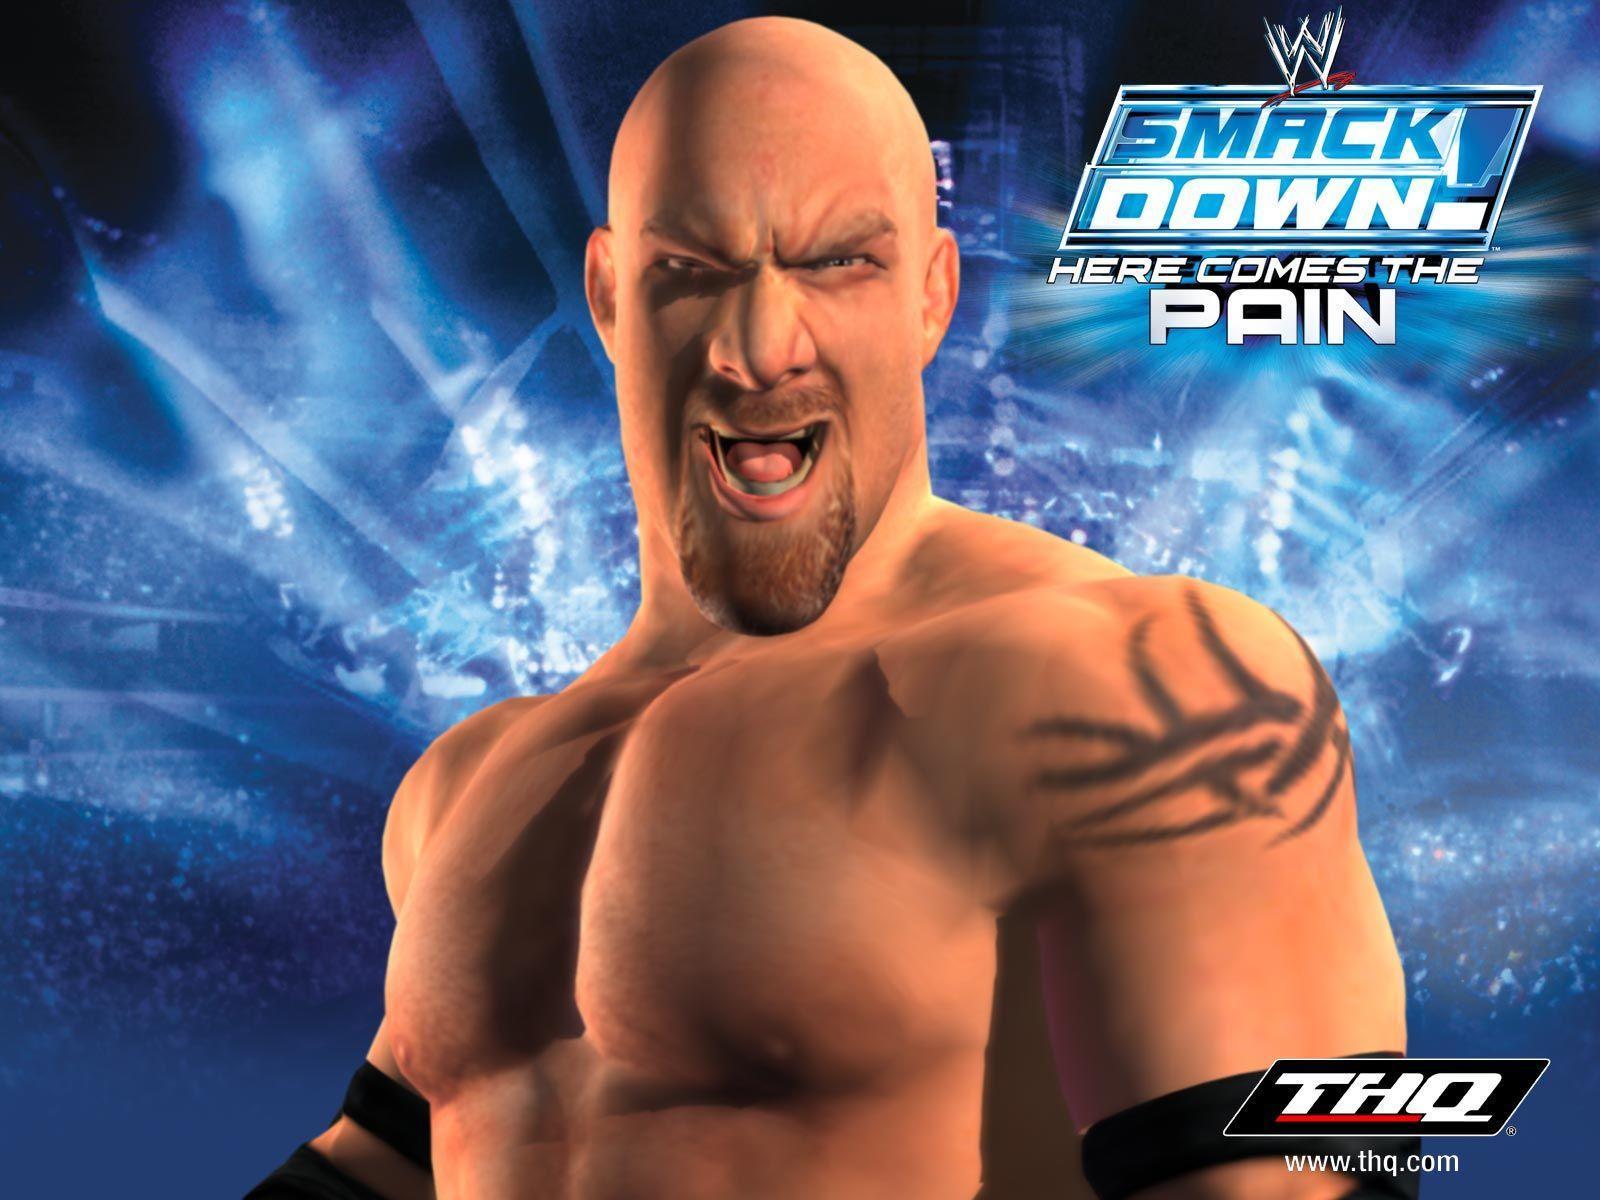 Latest Screens, WWE SmackDown! Here Comes the Pain Wallpaper